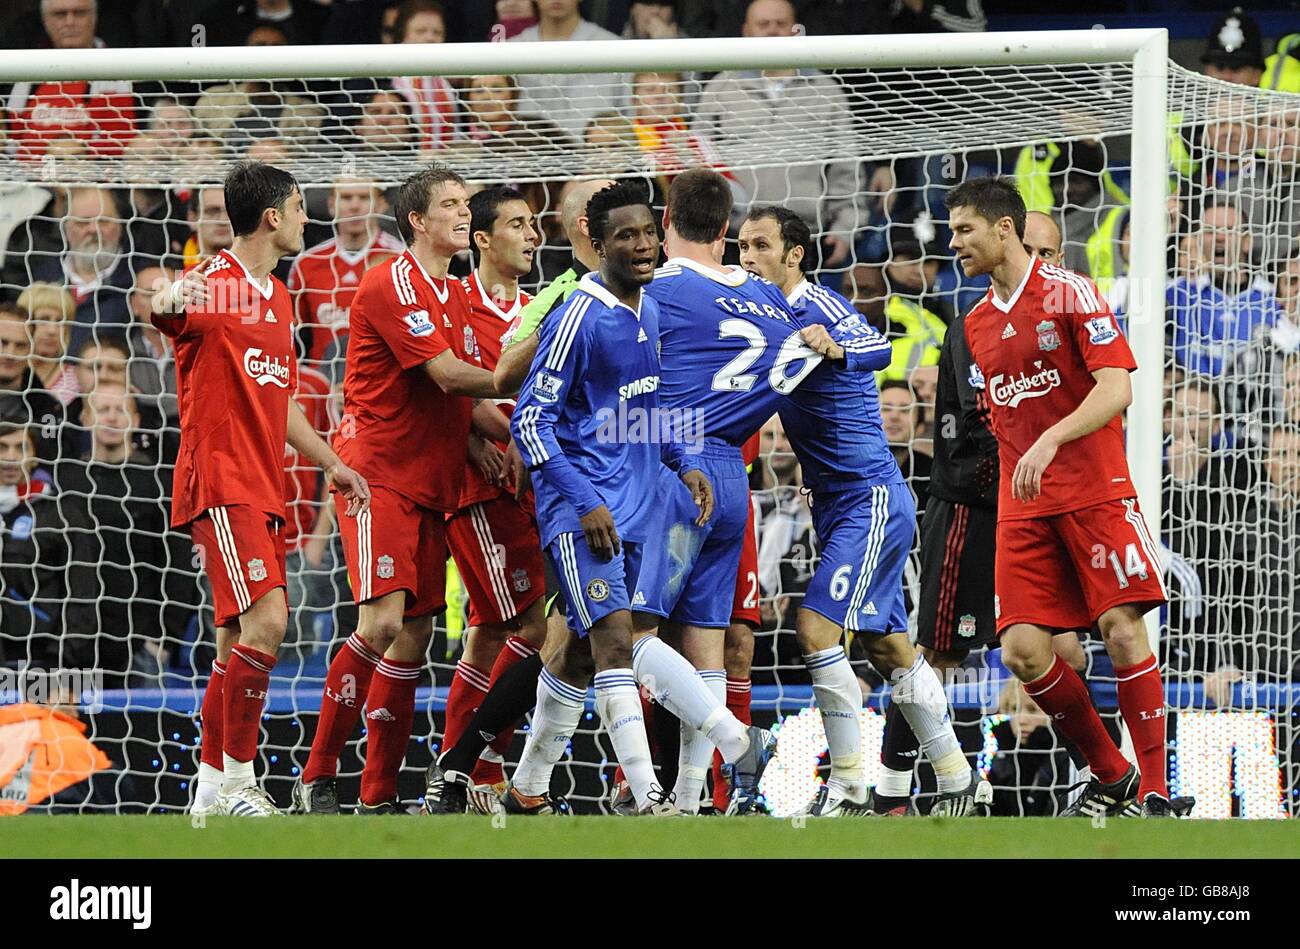 Soccer - Barclays Premier League - Chelsea v Liverpool - Stamford Bridge. Tempers flare in the penalty area after a challenge between Chelsea's John Terry and Liverpool goalkeeper Jose Reina Stock Photo